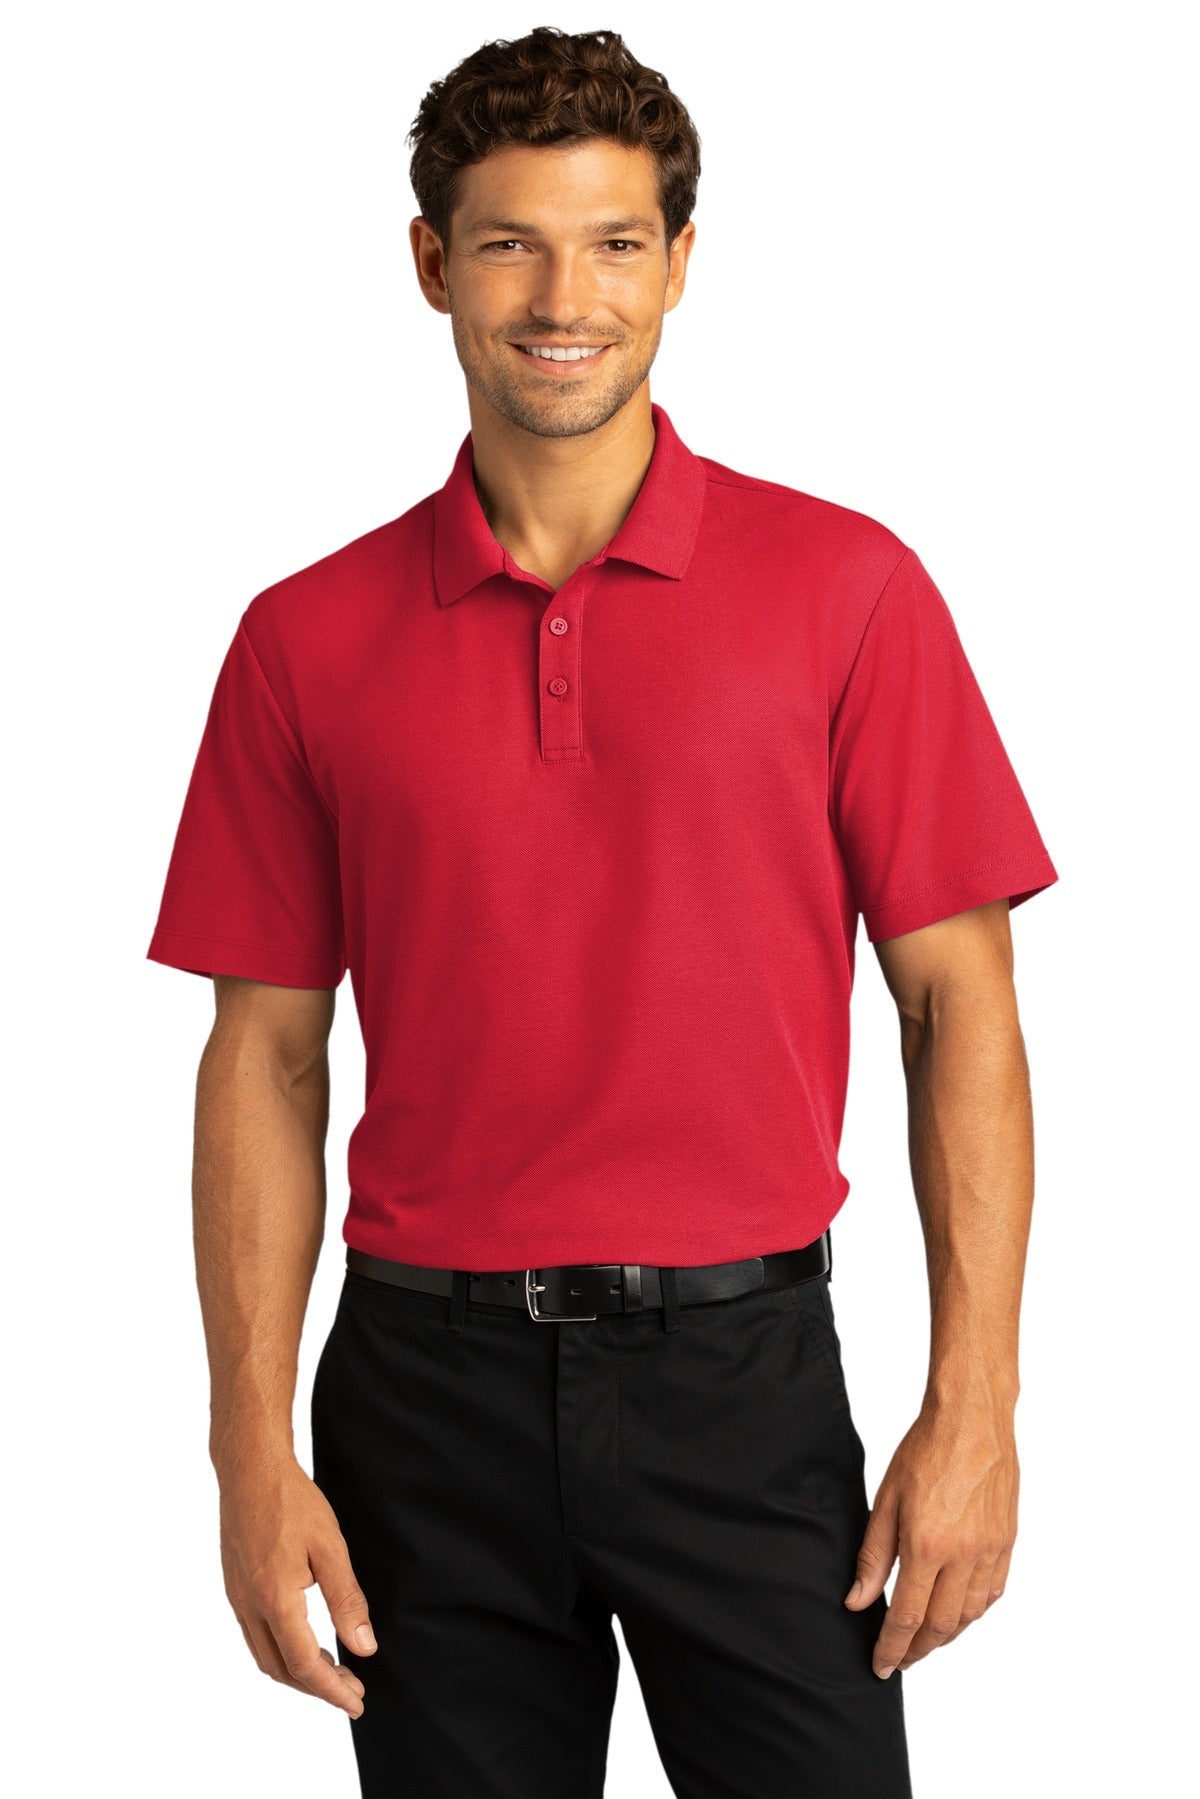 Port Authority ® SuperPro React ™ Polo. K810 [Rich Red] - DFW Impression